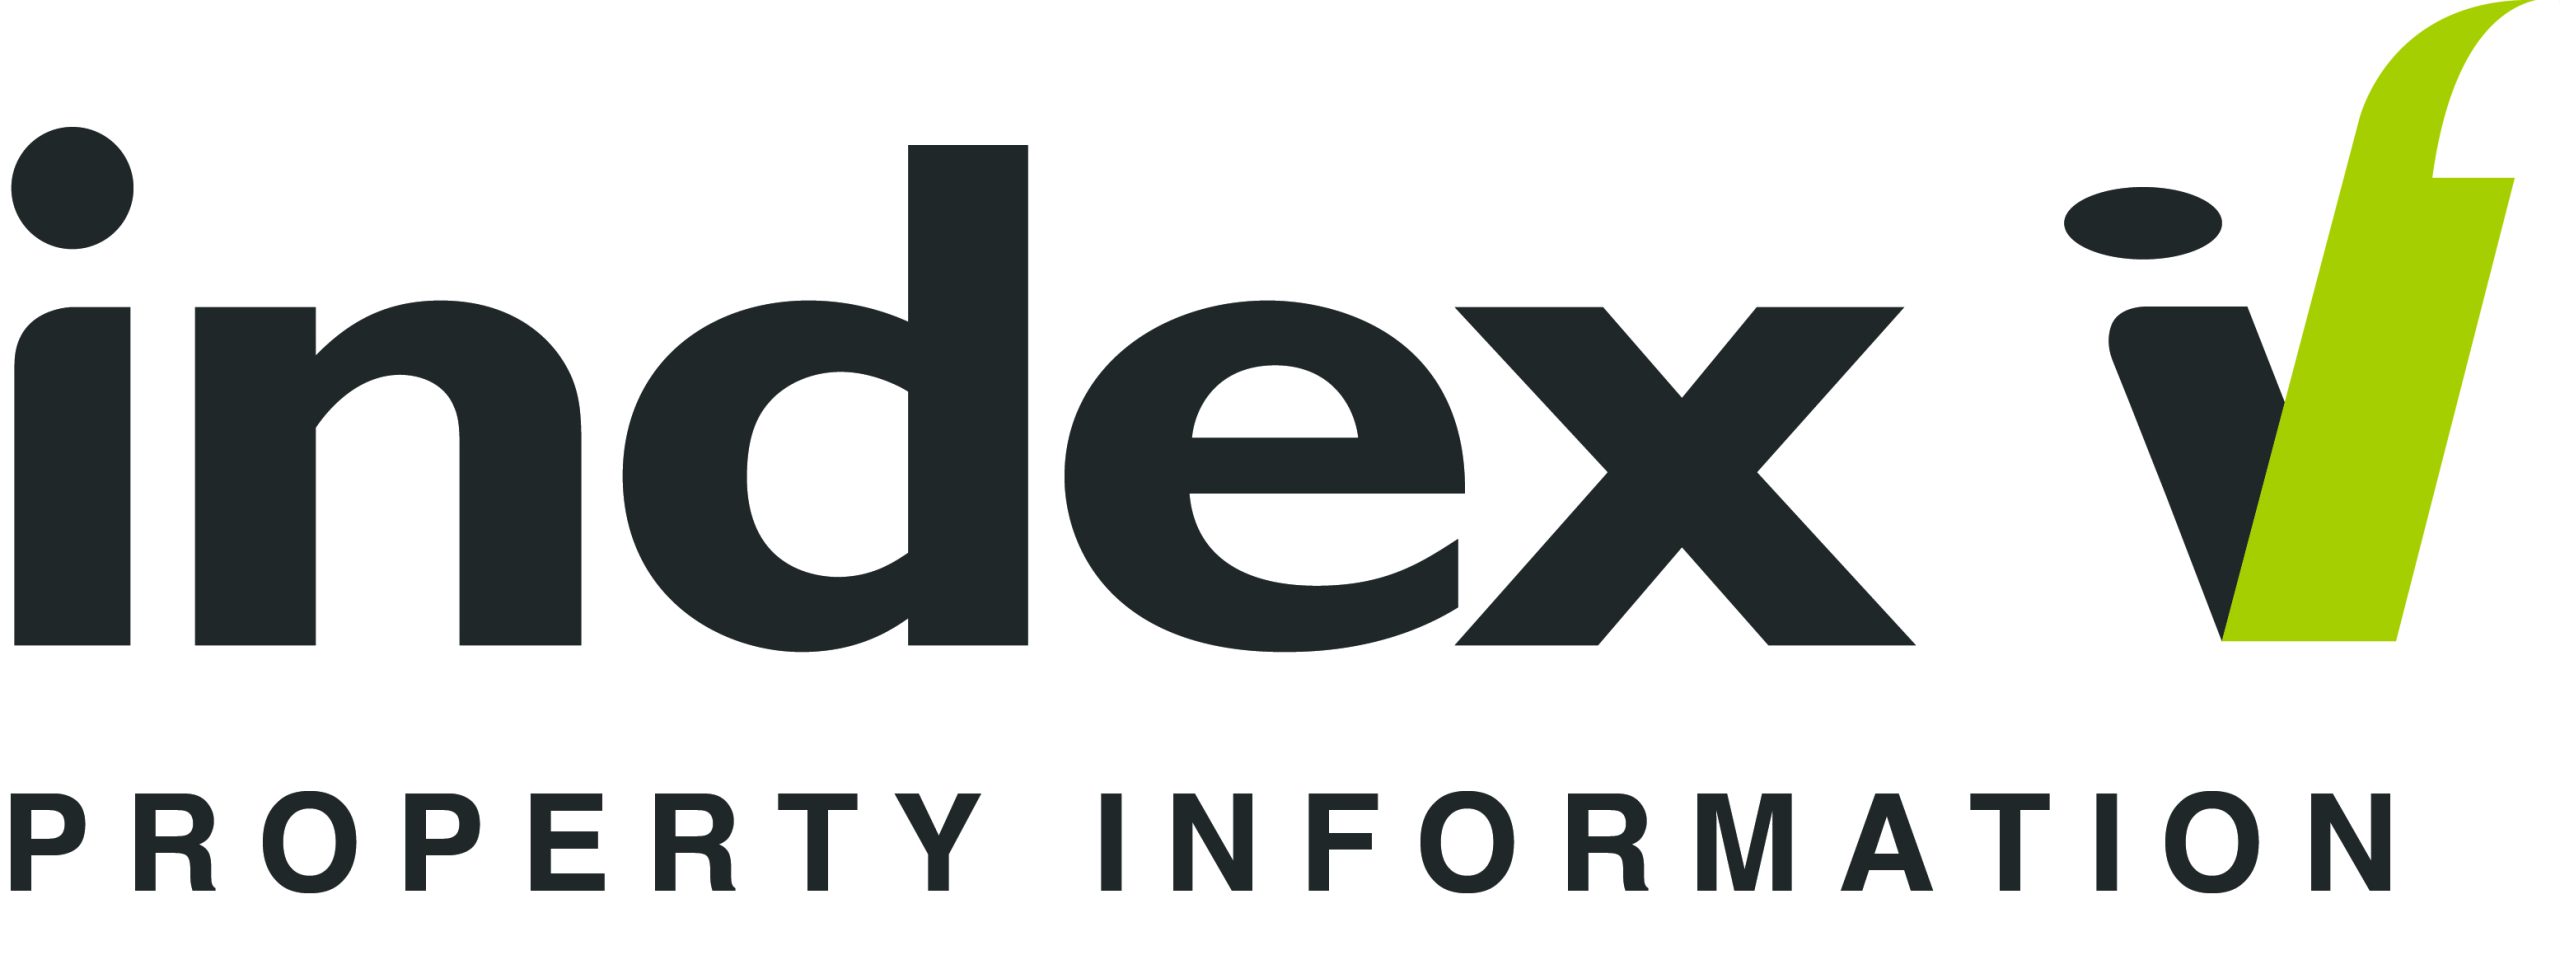 Index Property Information - South East